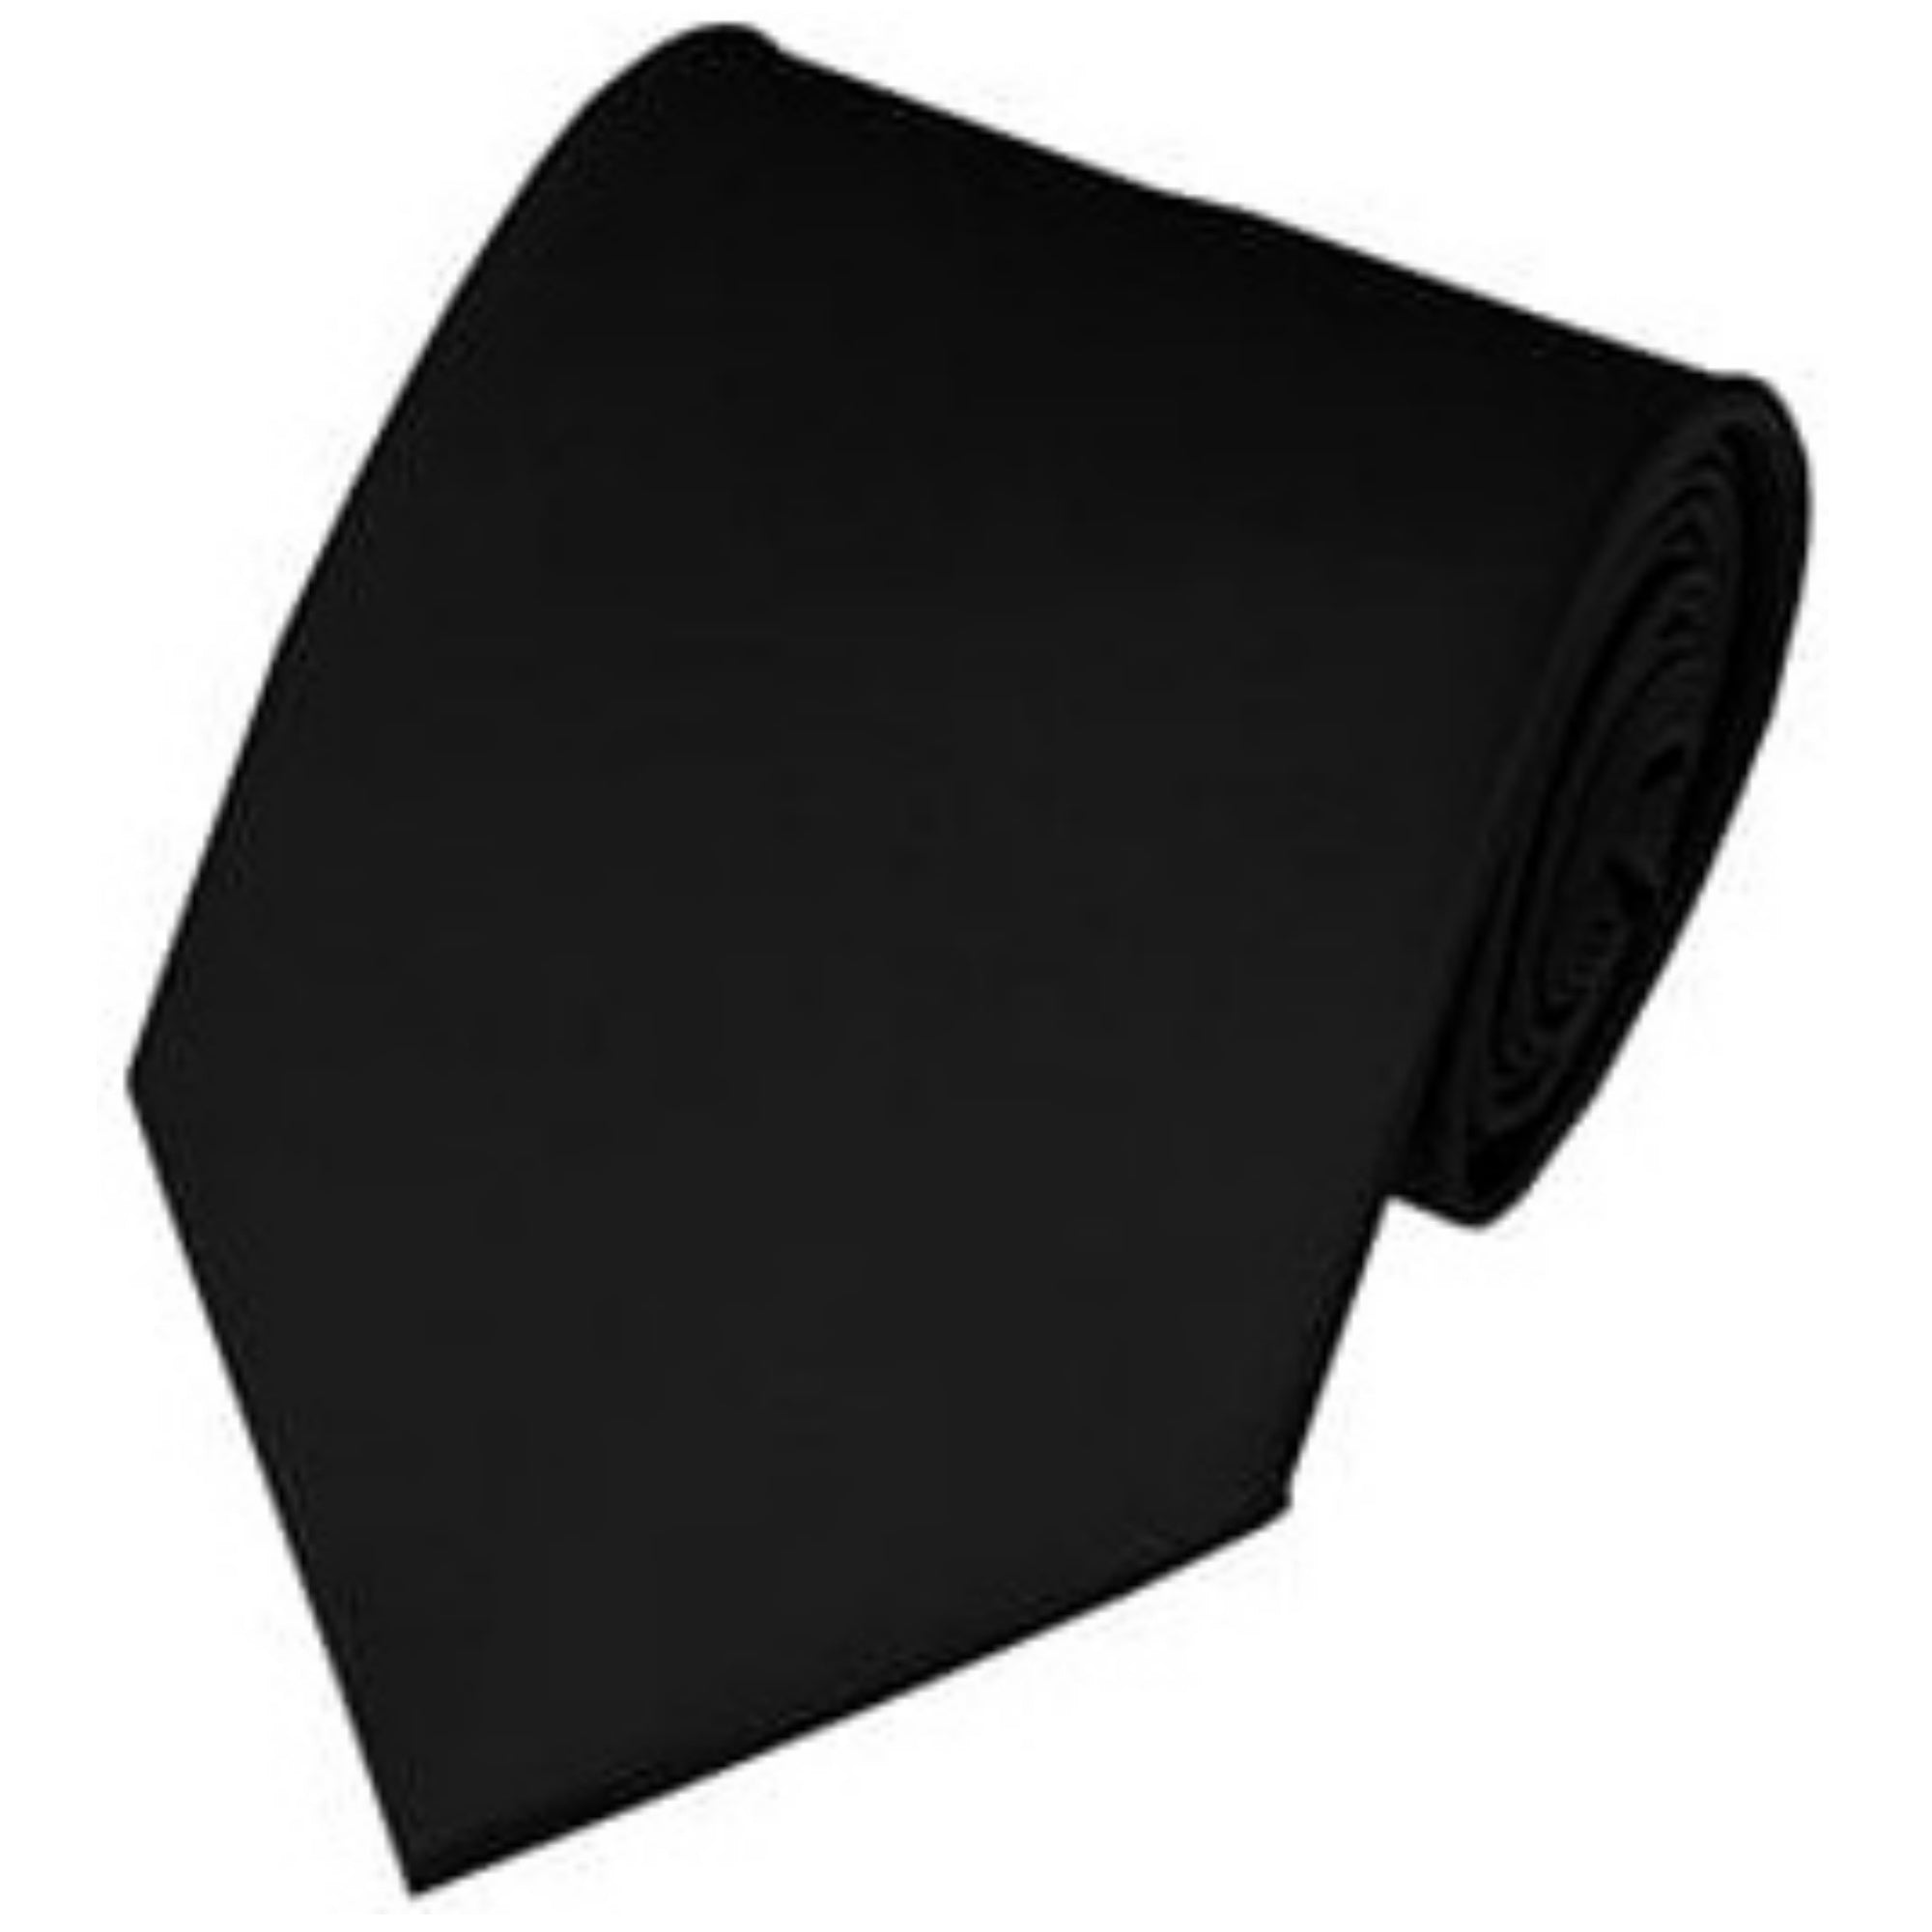 TheDapperTie Solid Color 3.5 Inch Wide And 62 Inch Extra Long Necktie For Big & Tall Men Neck Tie TheDapperTie Black  